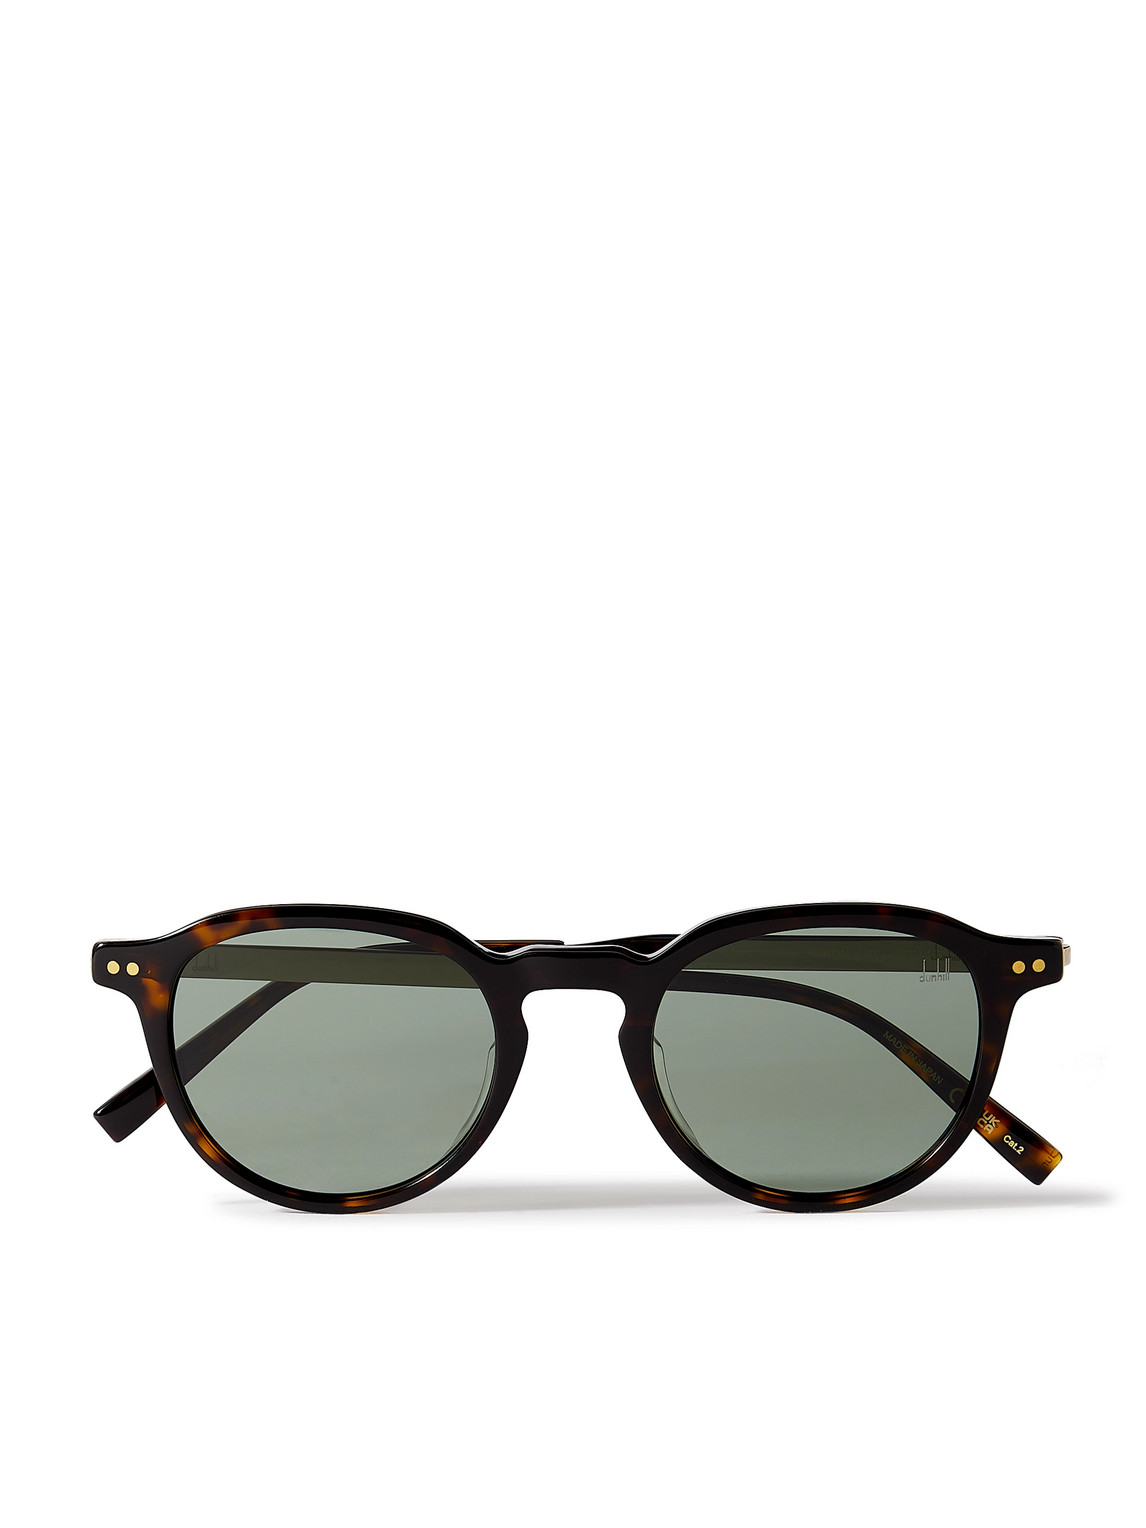 Dunhill Round-frame Tortoiseshell Acetate And Gold-tone Sunglasses In Grey